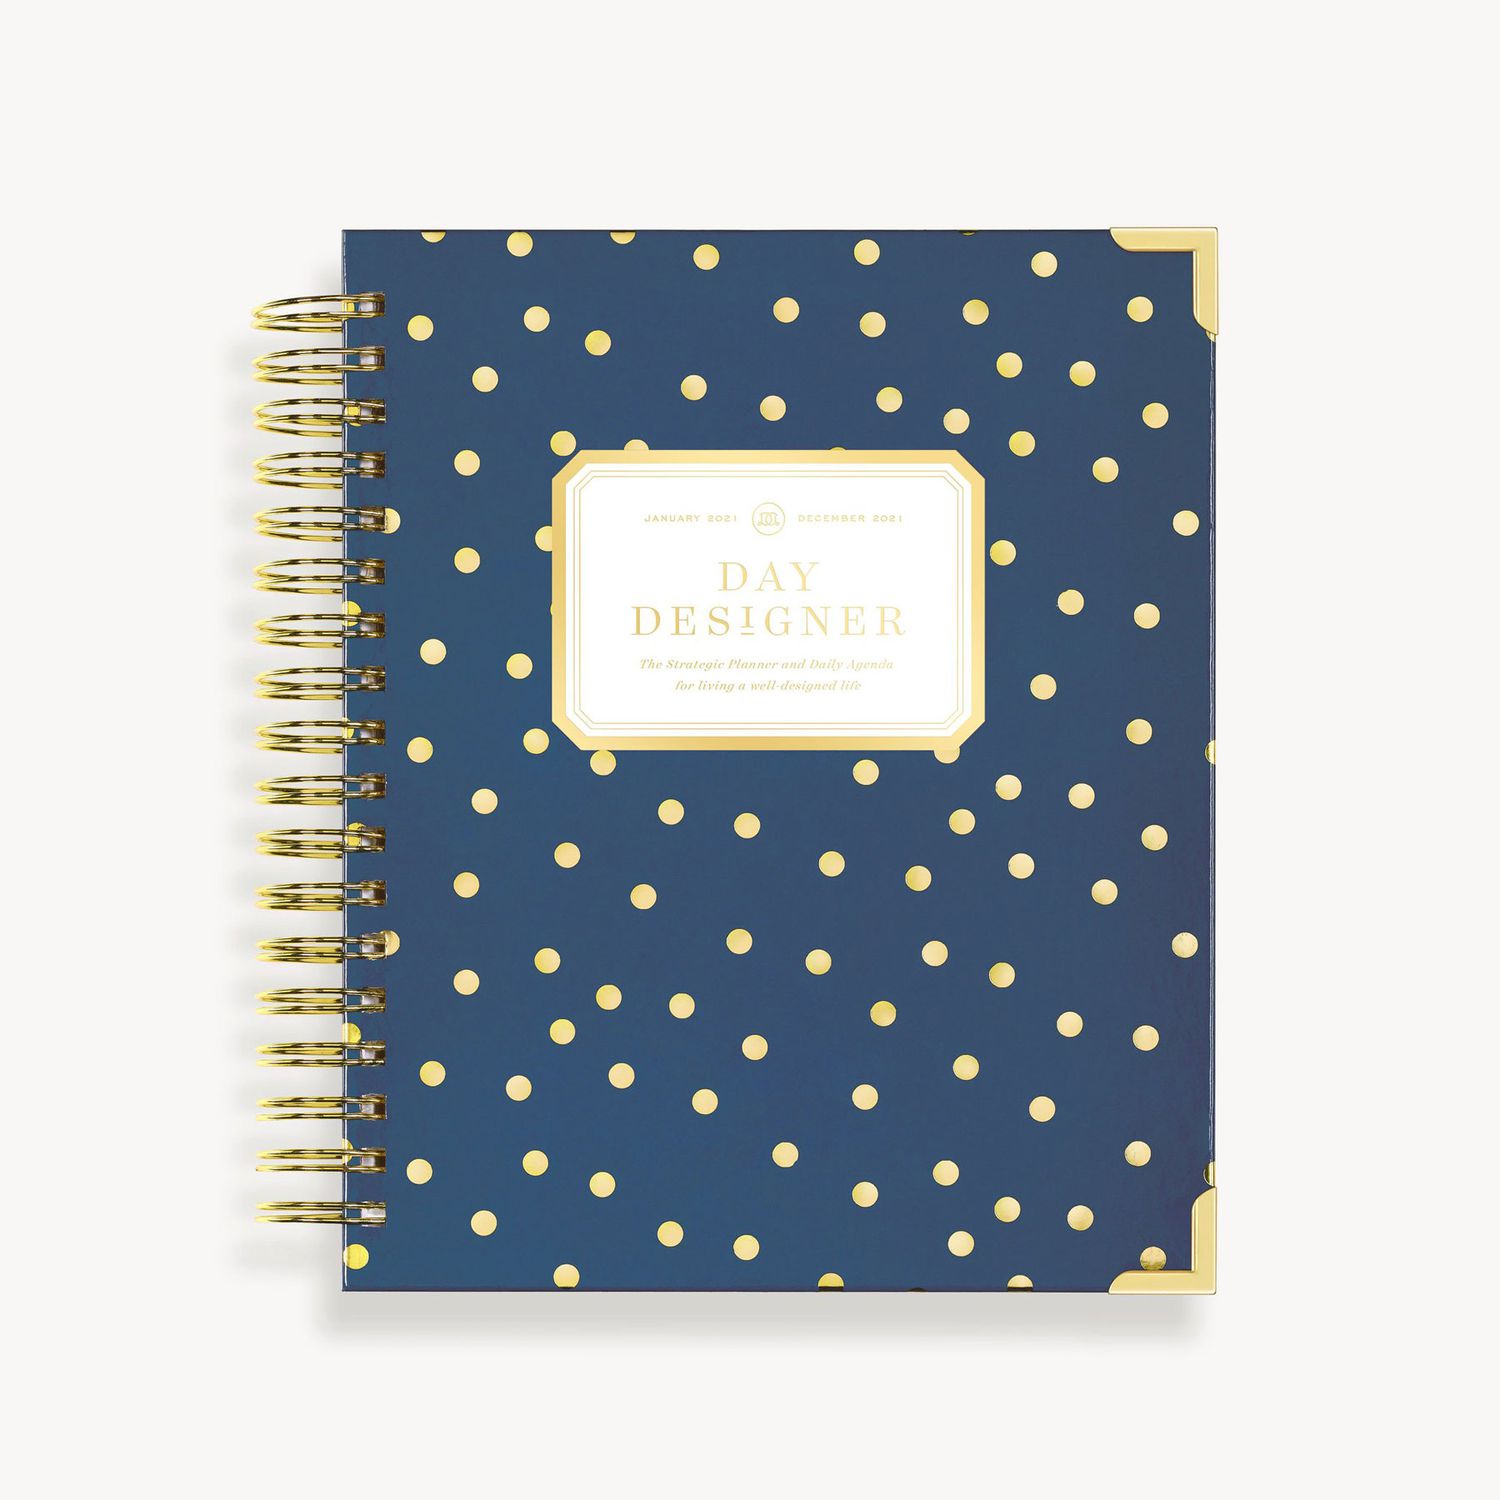 Best weekly, daily, monthly planners - Day Designer 2021 Daily Planner